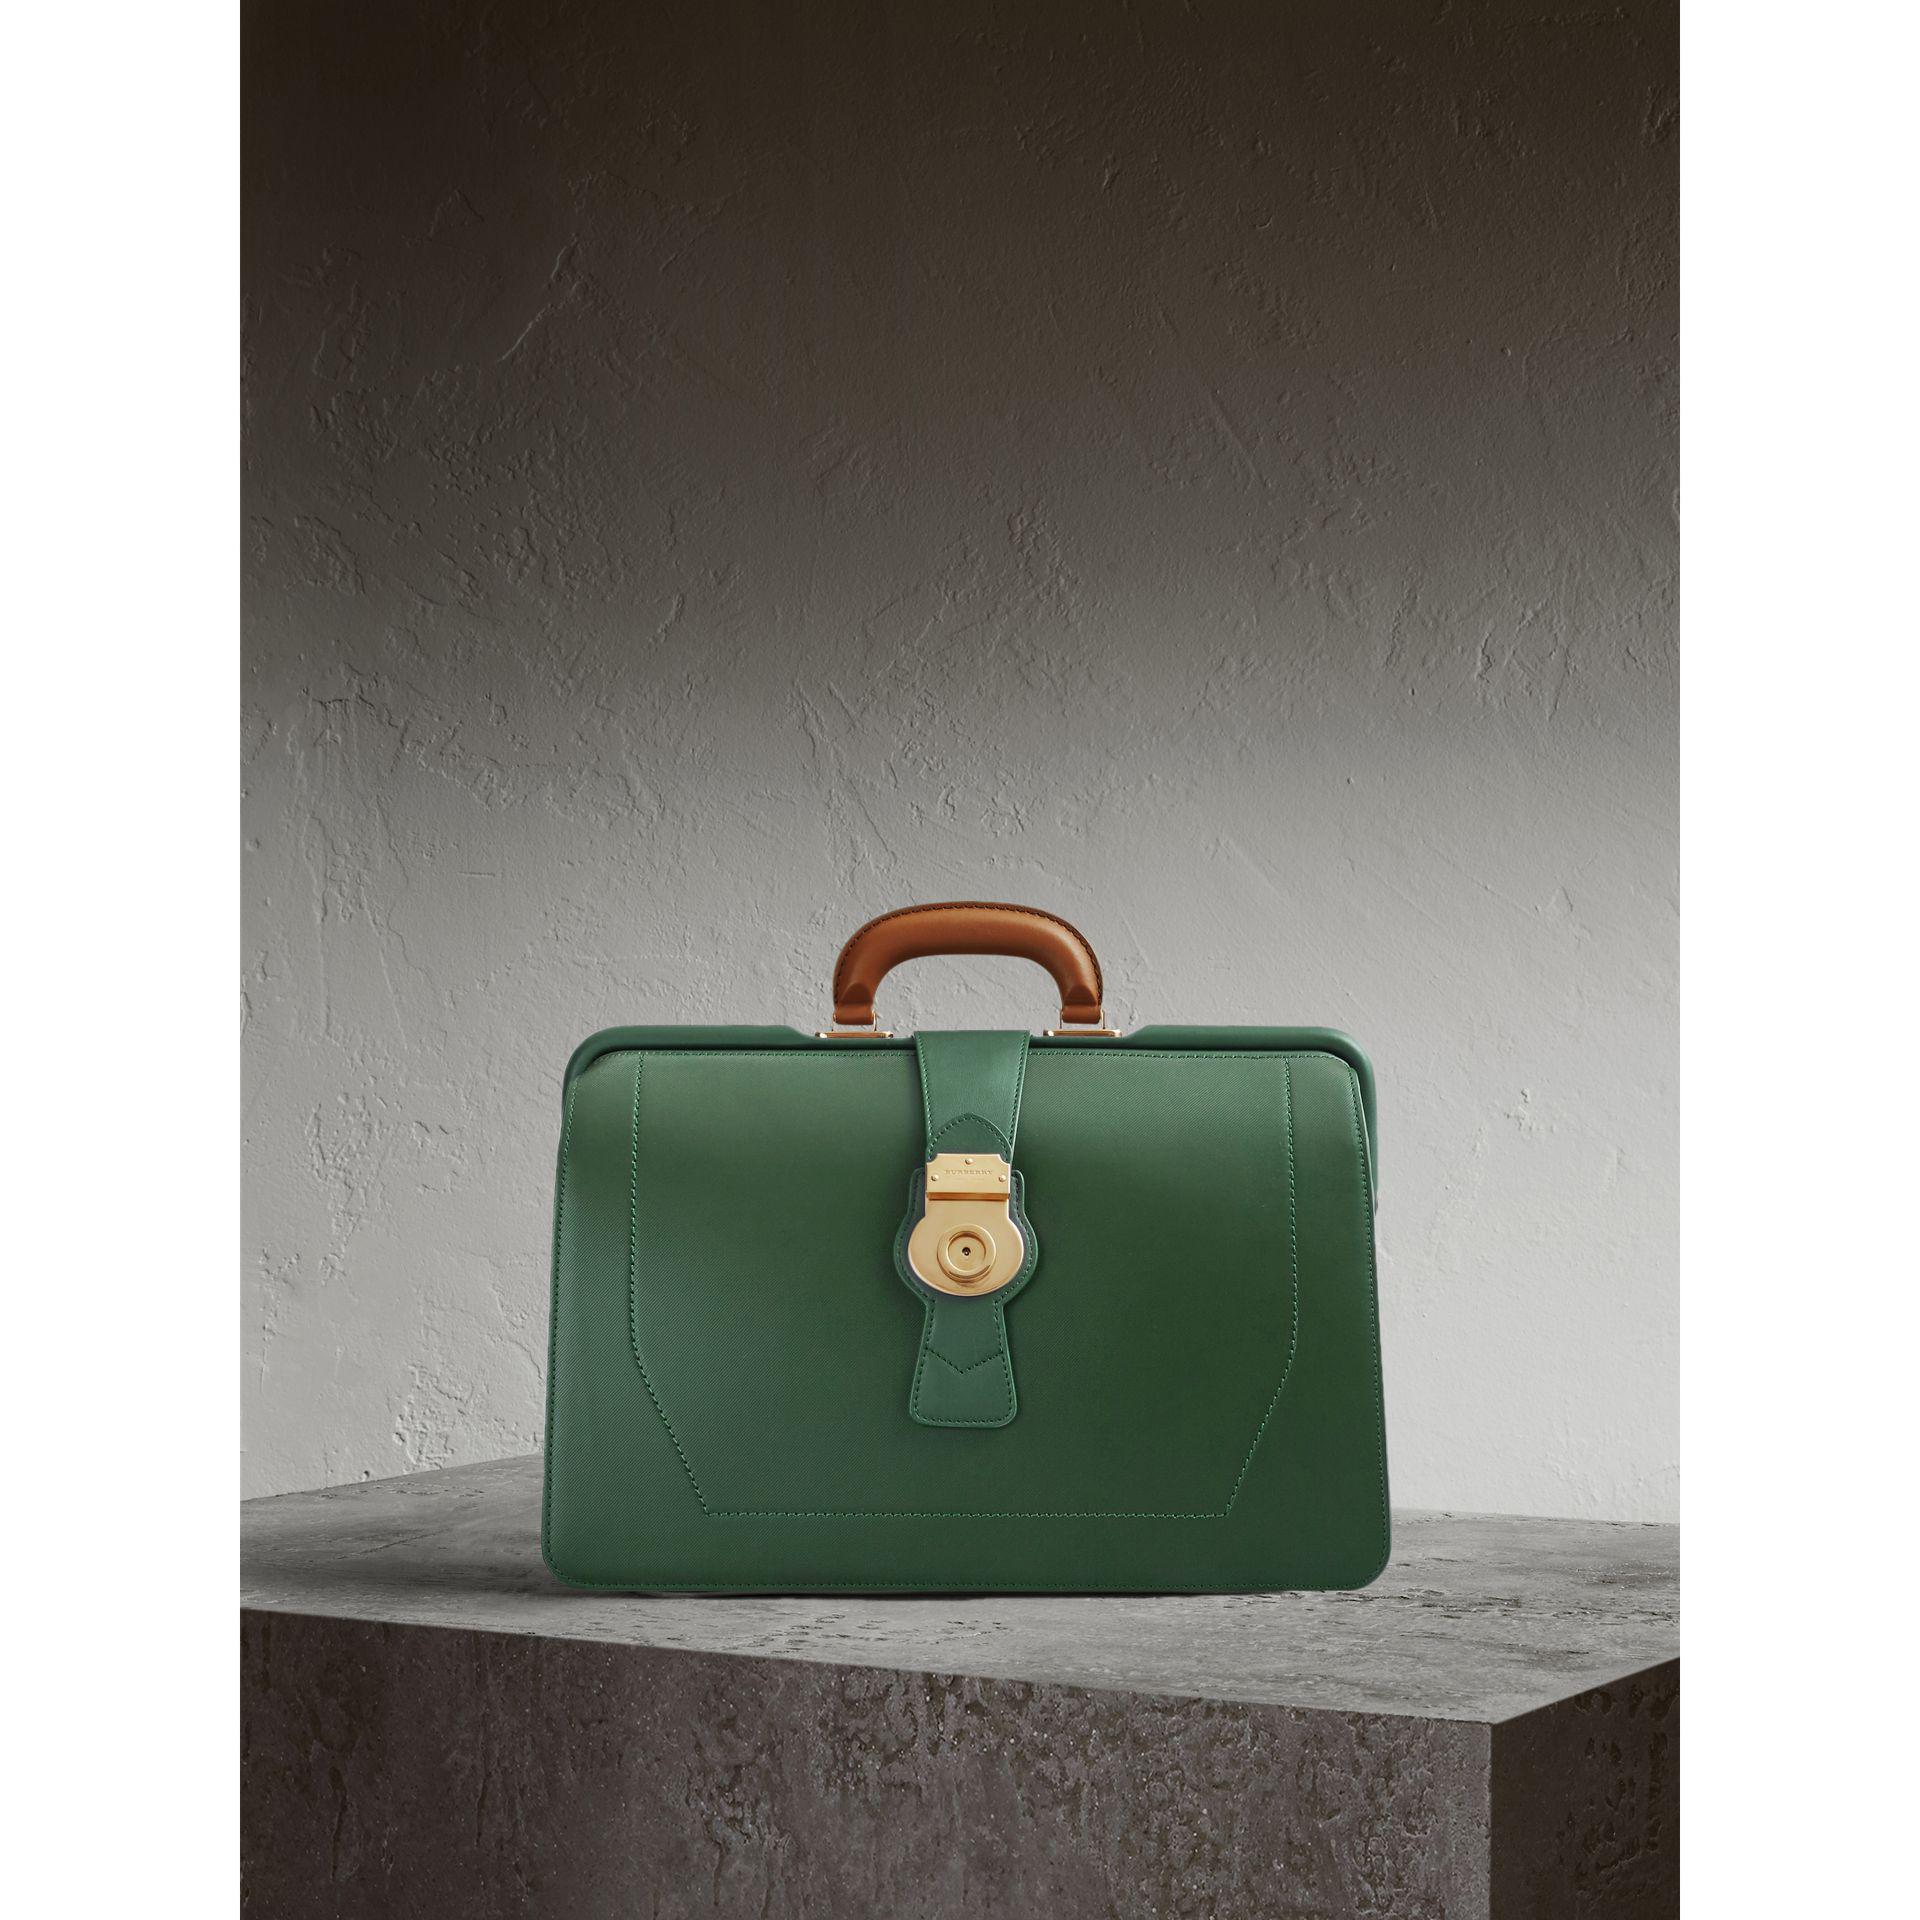 Burberry The Dk88 Bag Forest Green for Men Lyst